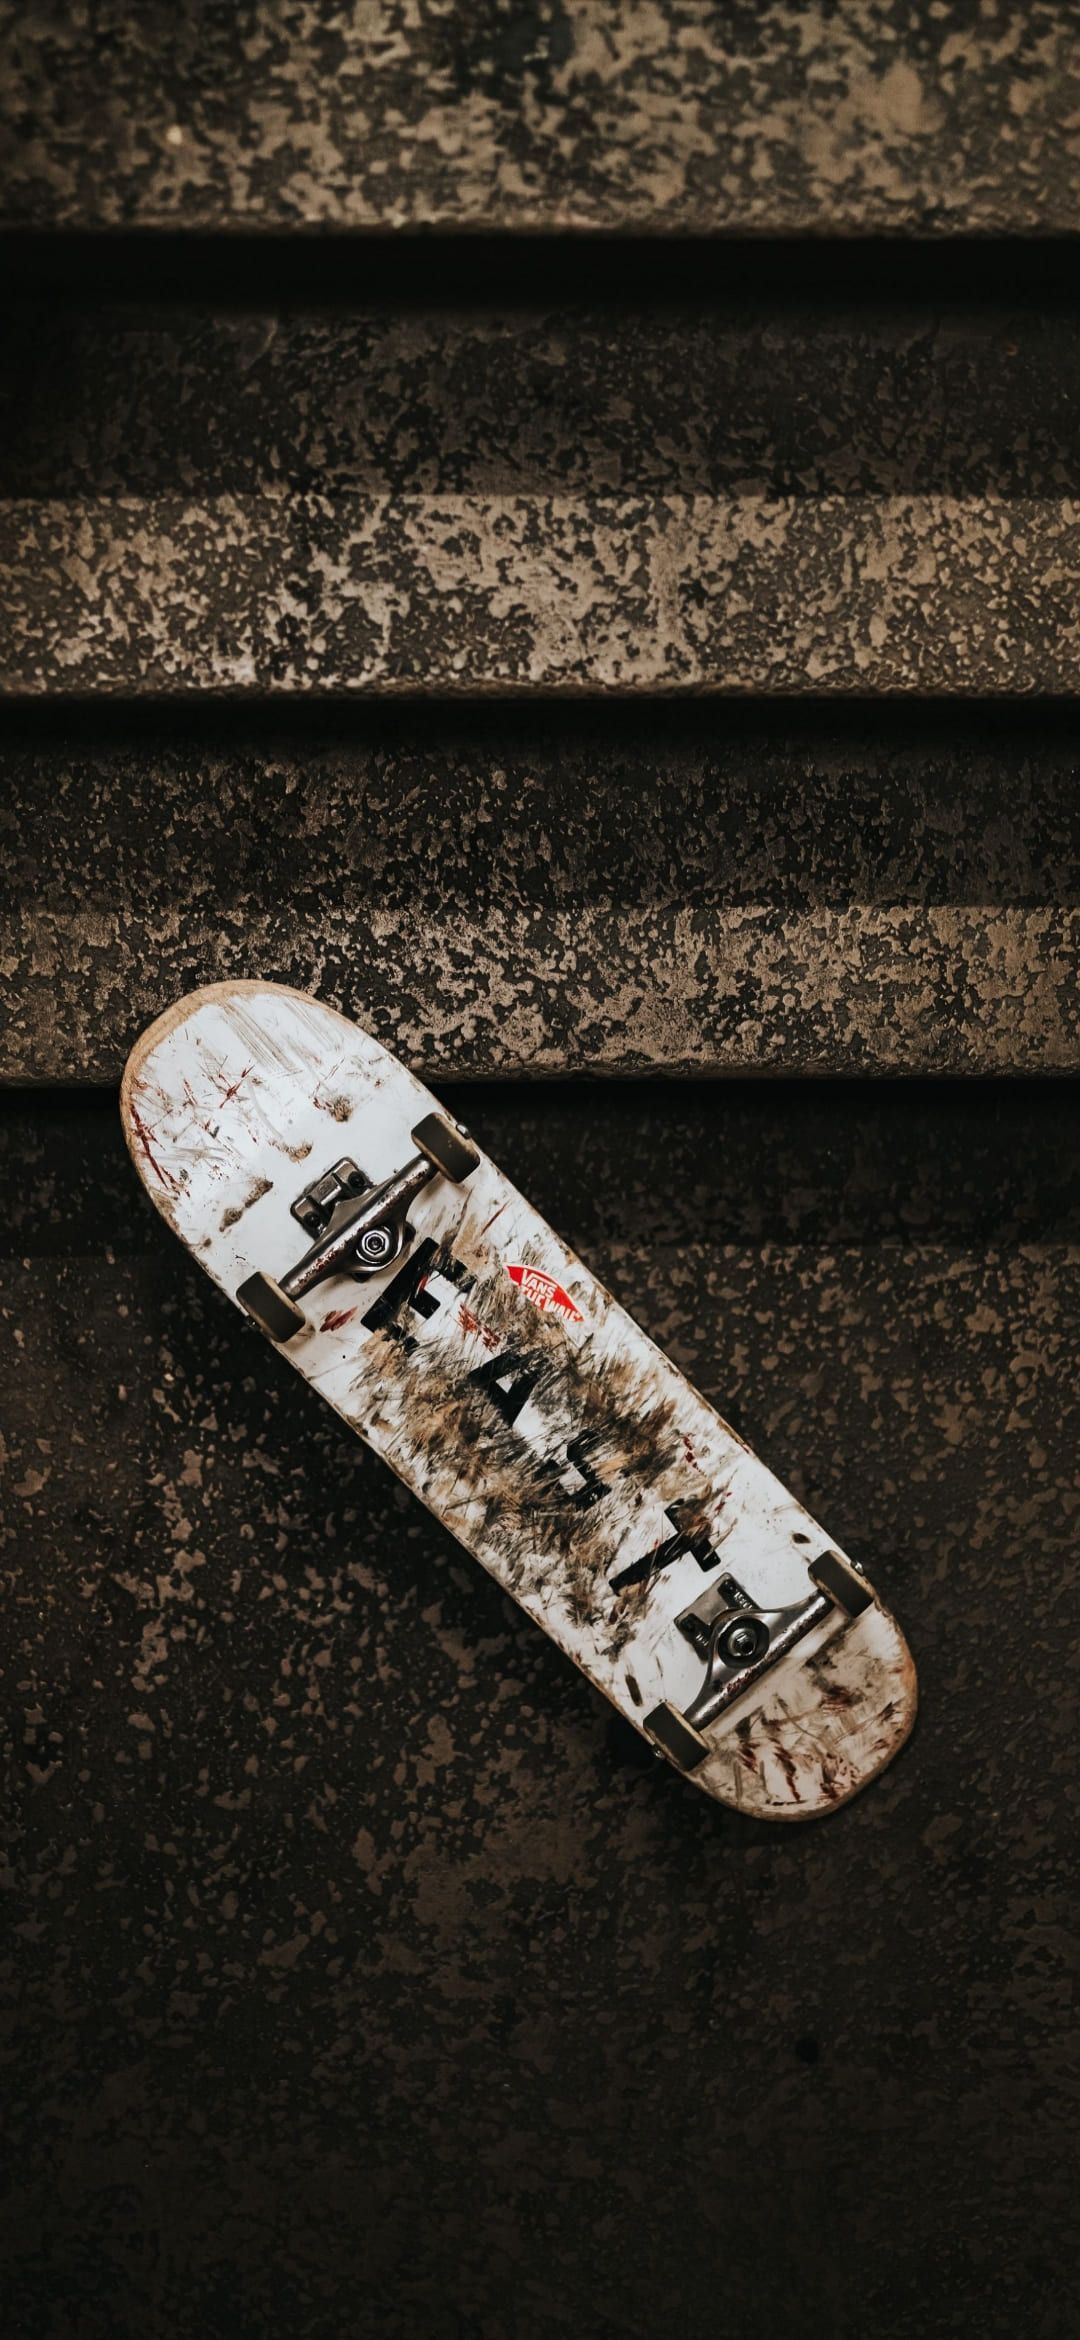 IPhone wallpaper of a dirty skateboard on a black surface - Skate, skater